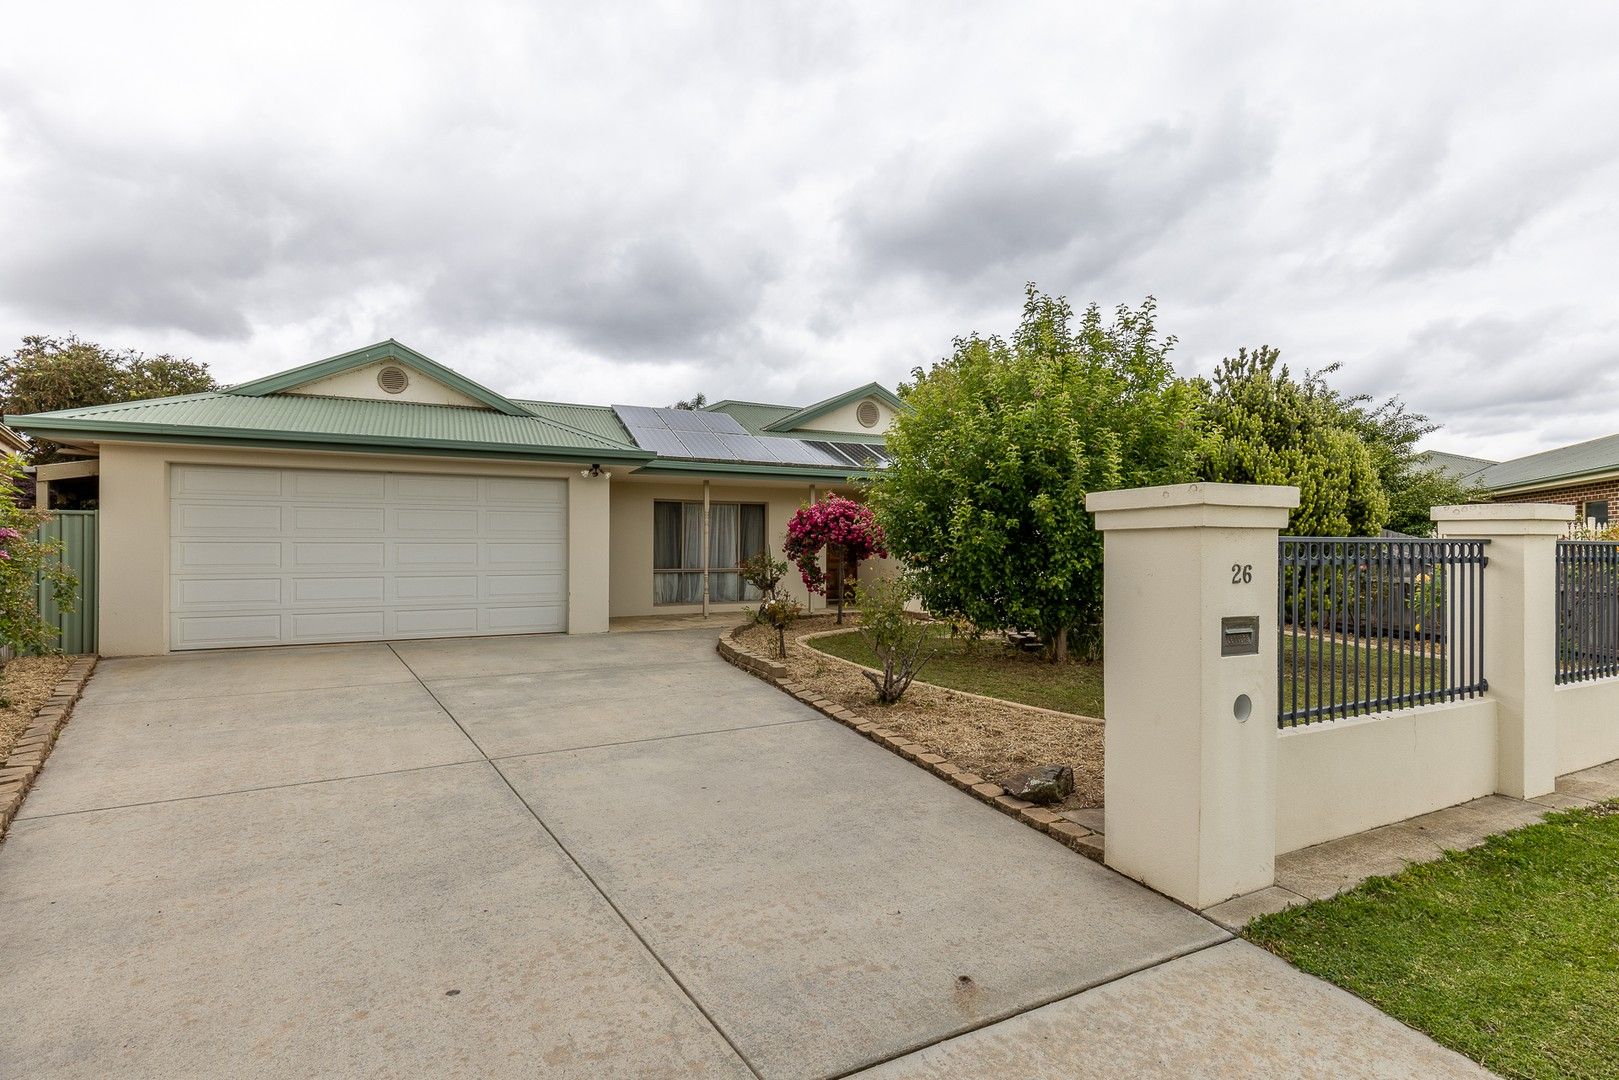 4 bedrooms House in 26 Woodburne Drive SALE VIC, 3850